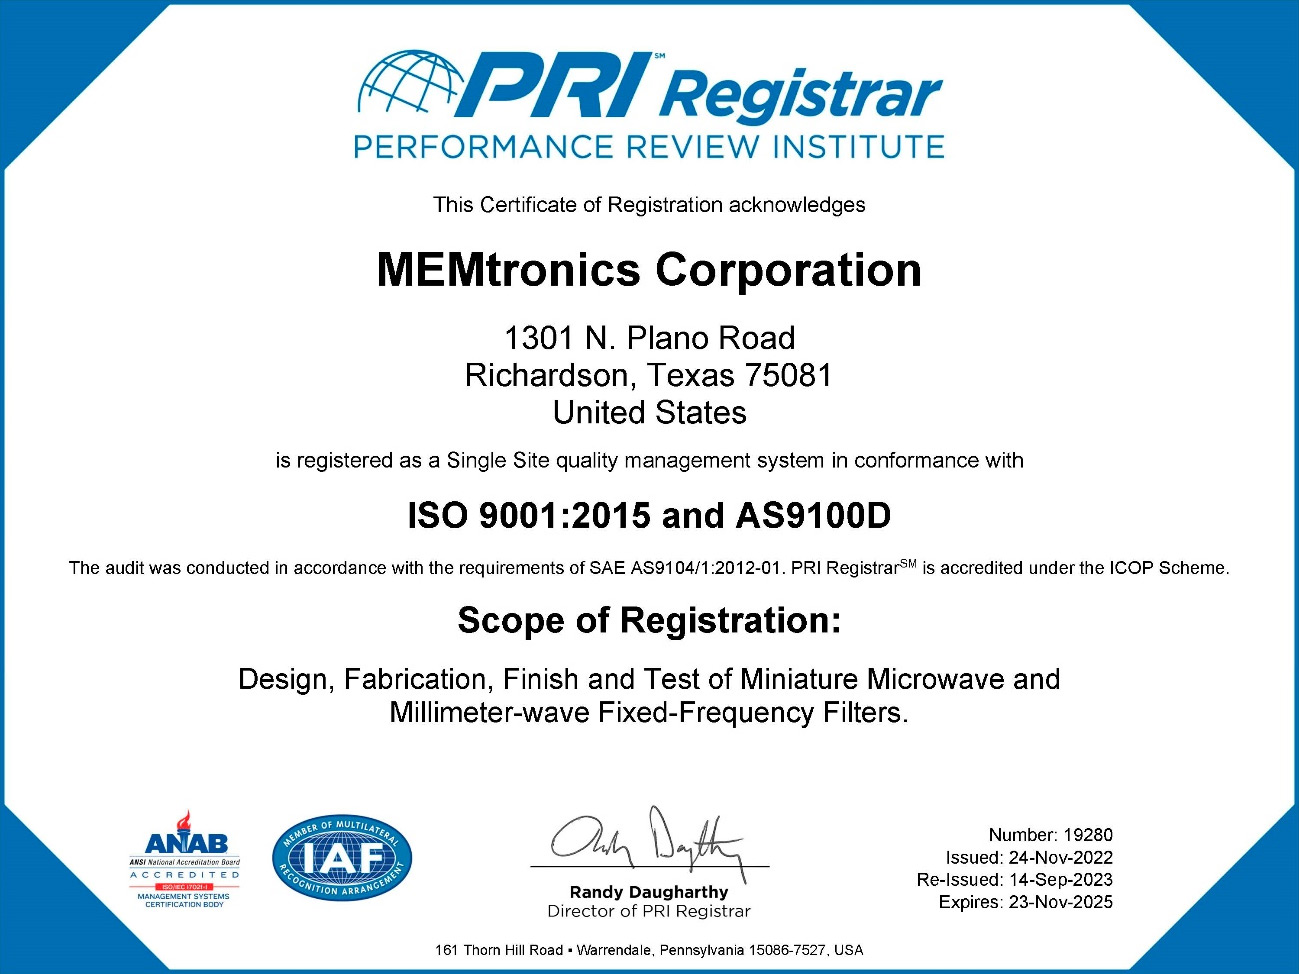 MEMtronics: AS9100D & ISO 9001 certified for design & manufacturing processes. Audited by PRI Registrar.